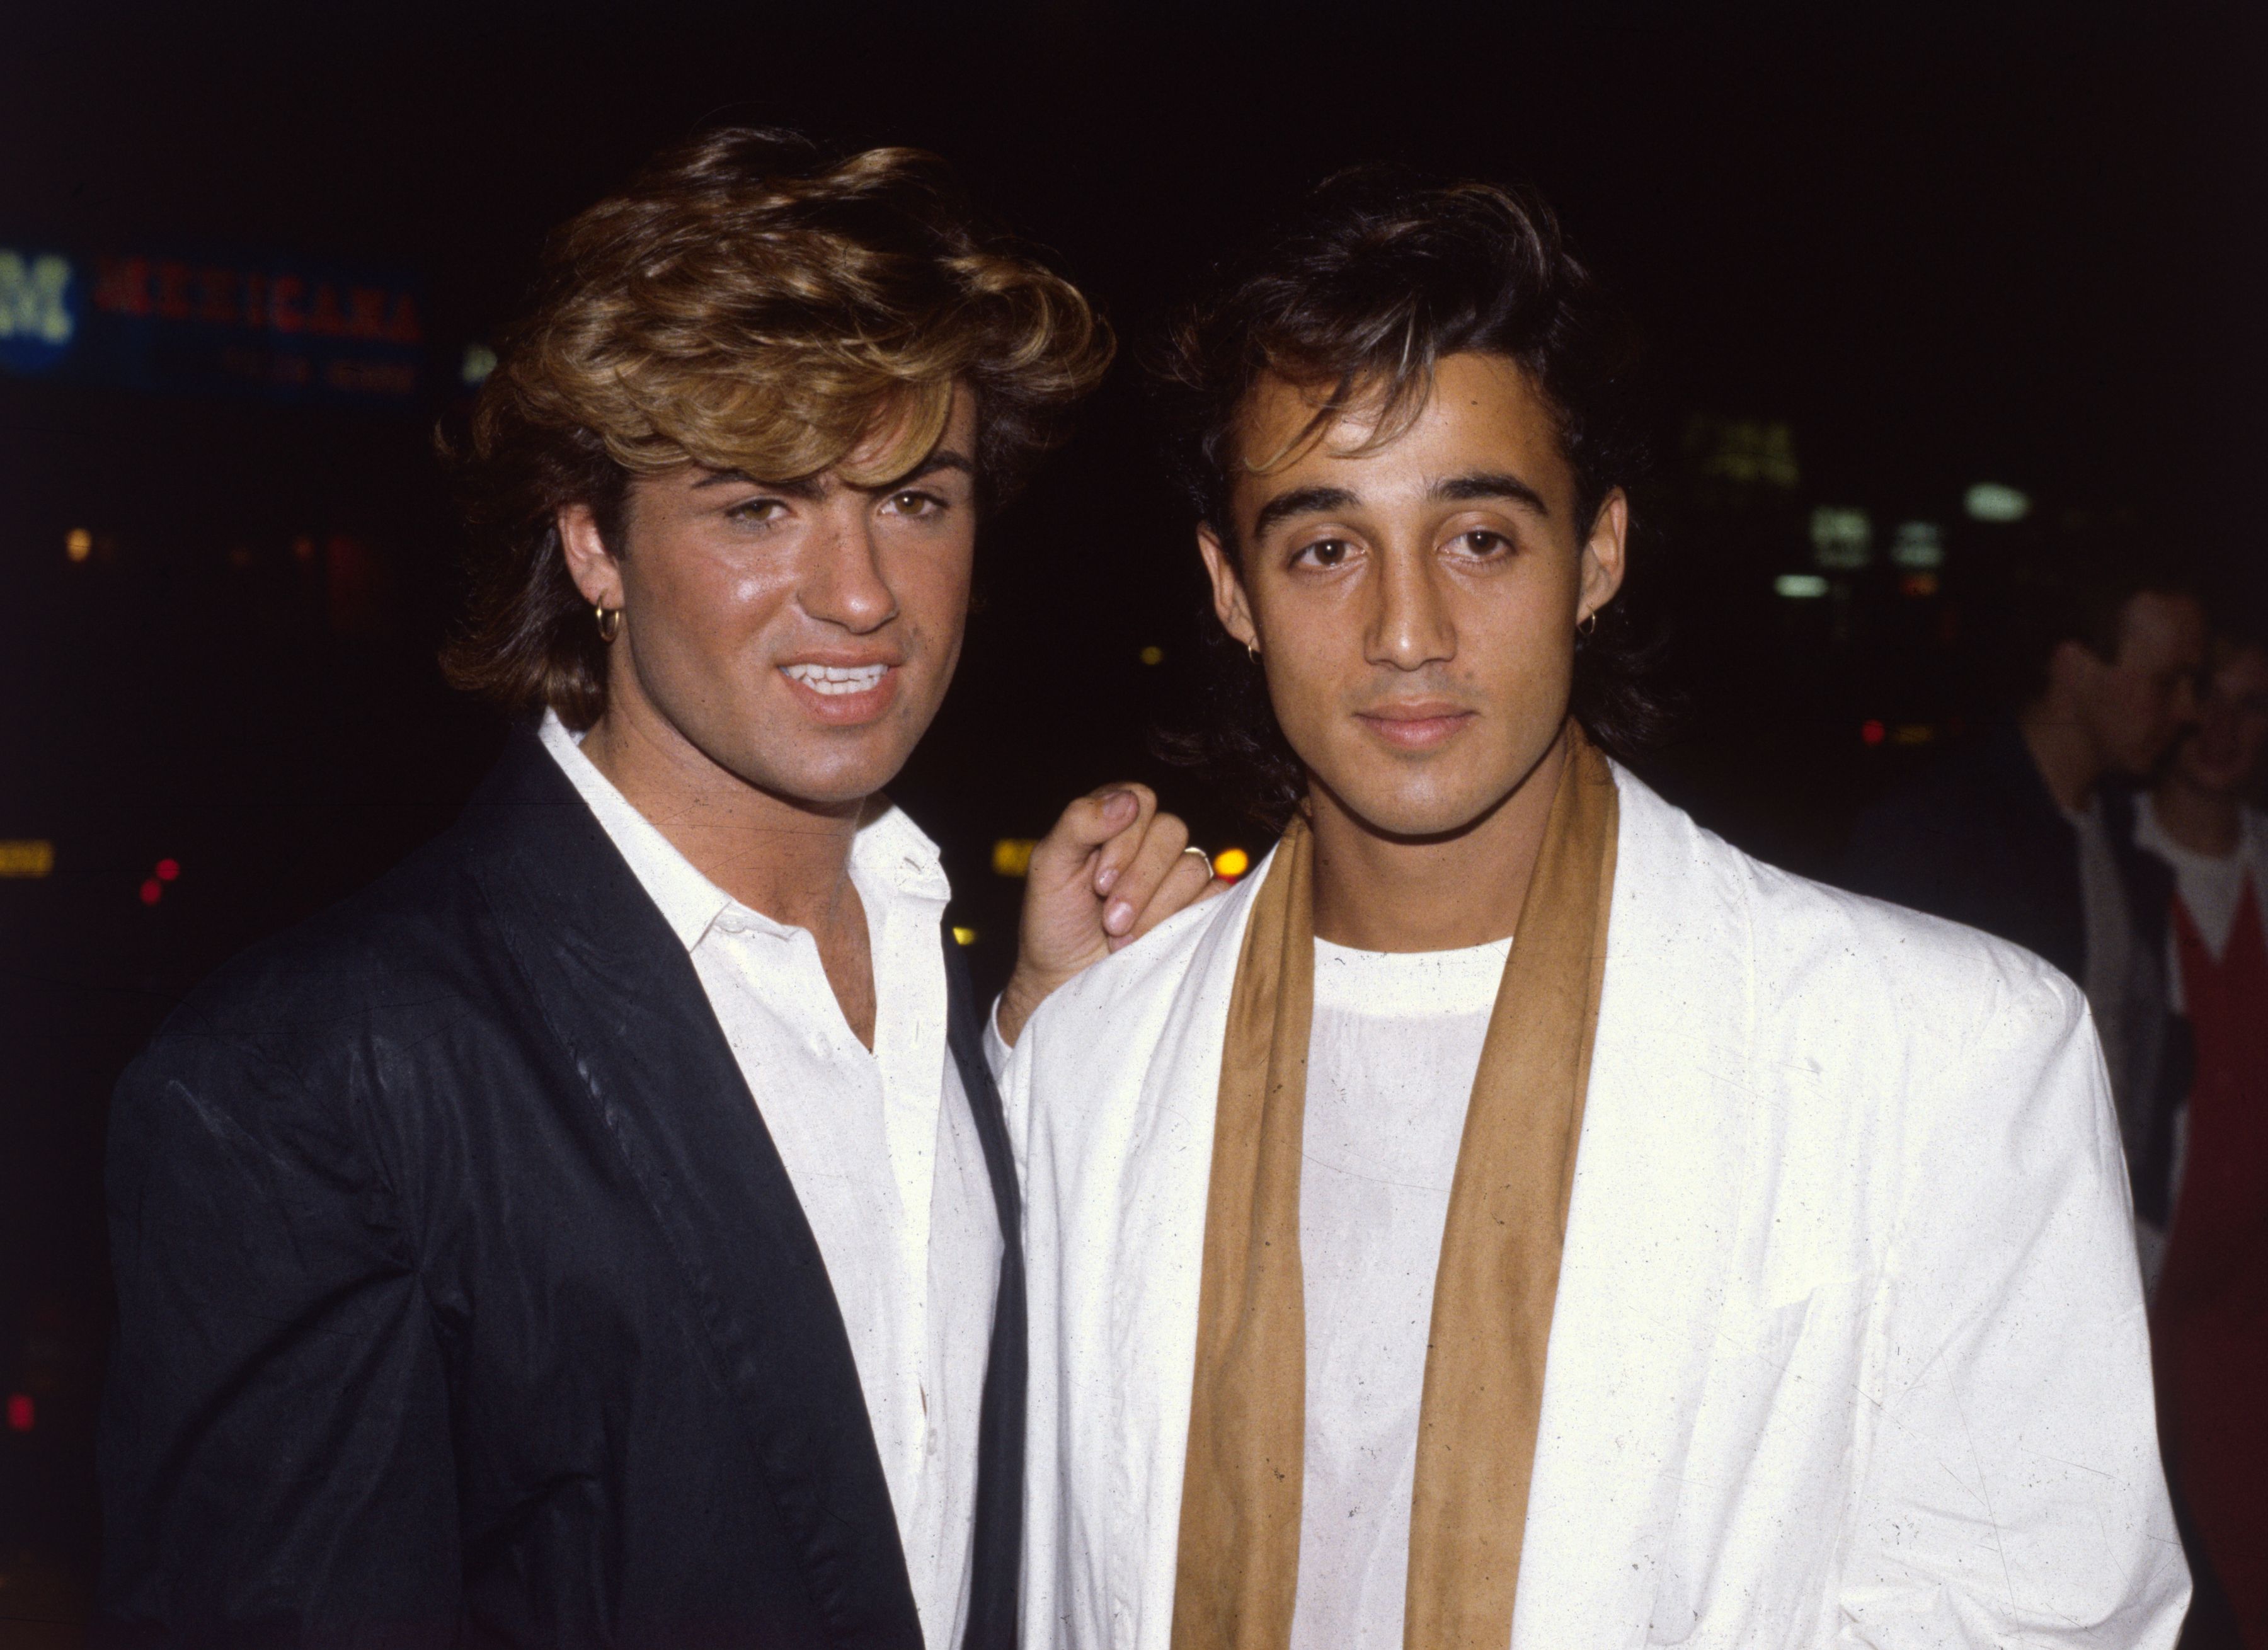 George Michael and Andrew Ridgeley in 1984